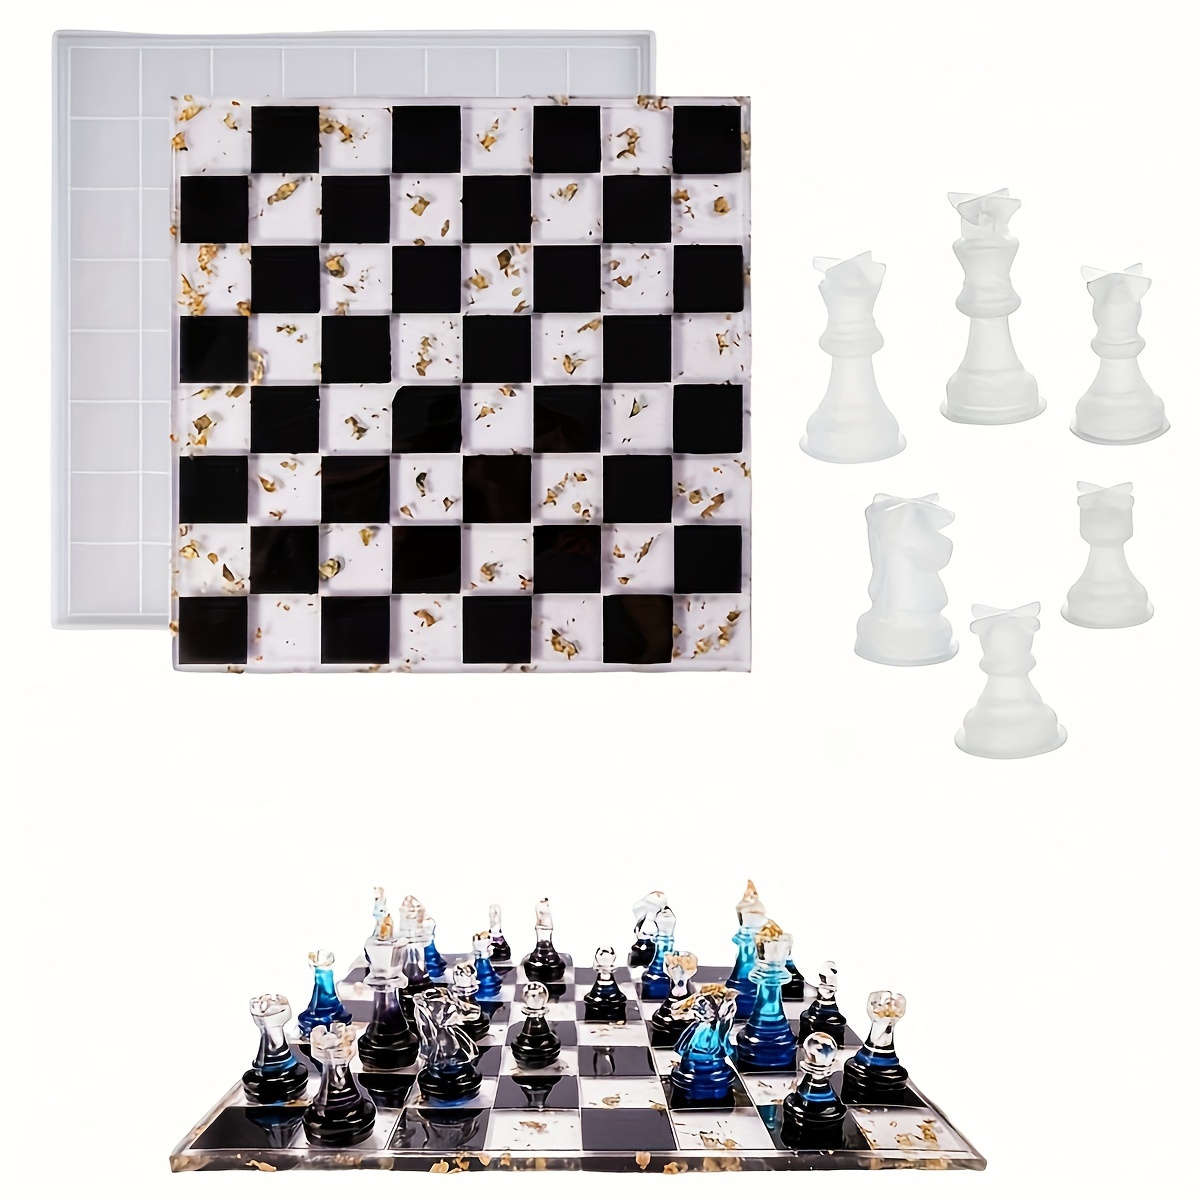 RESINWORLD 12 Inches XL Large Checkers Chess Board Mold for Resin, Full Size 3D Silicone Chess Piece Mold for Epoxy Resin, Chess Resin Mold Set, Chess